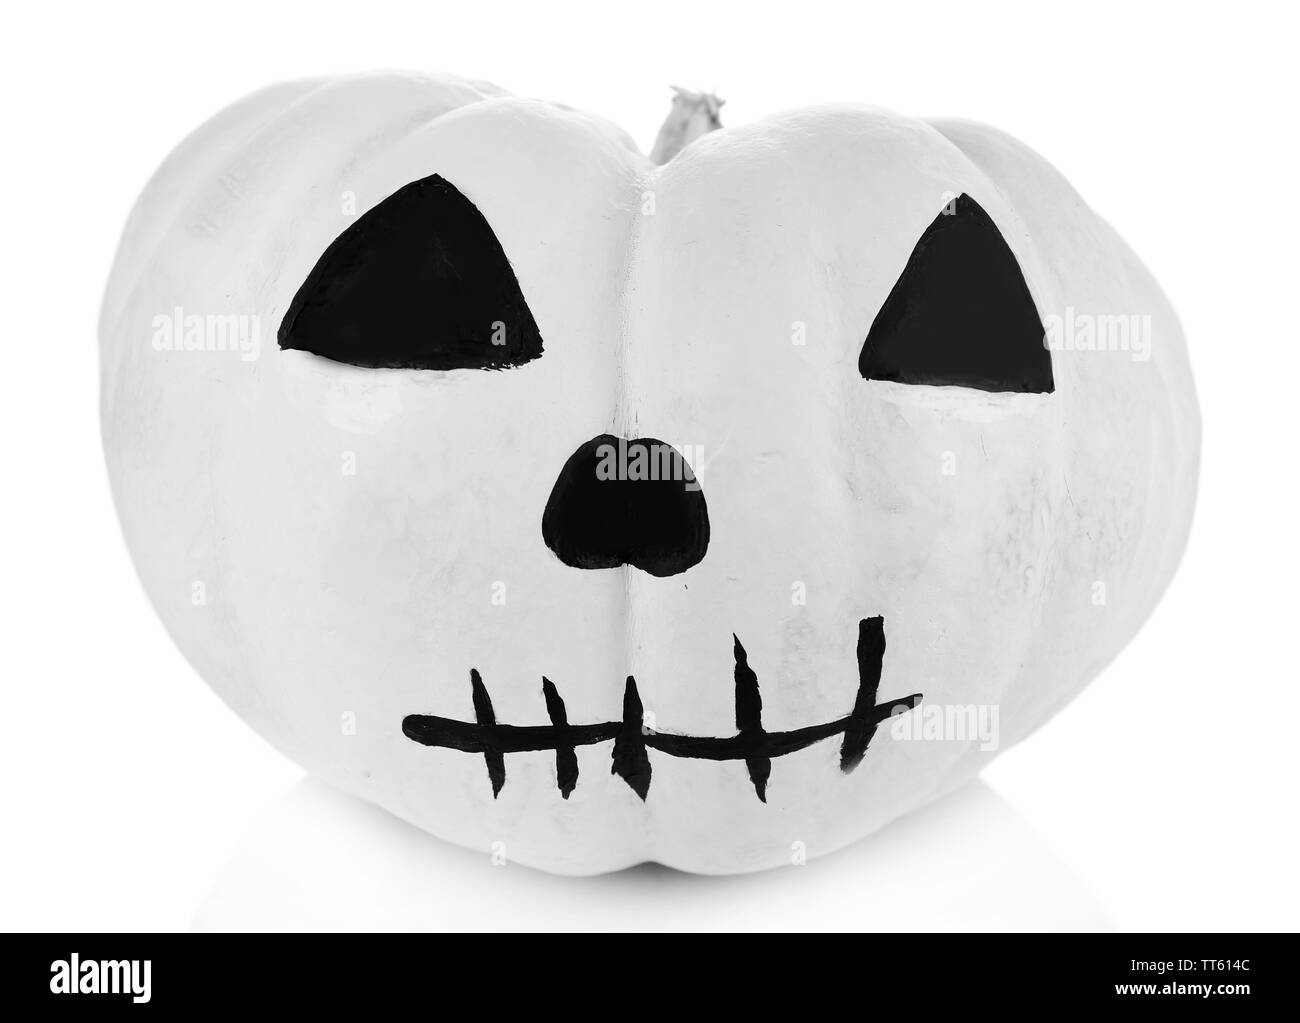 Citrouille Halloween blanc isolated on white Banque D'Images